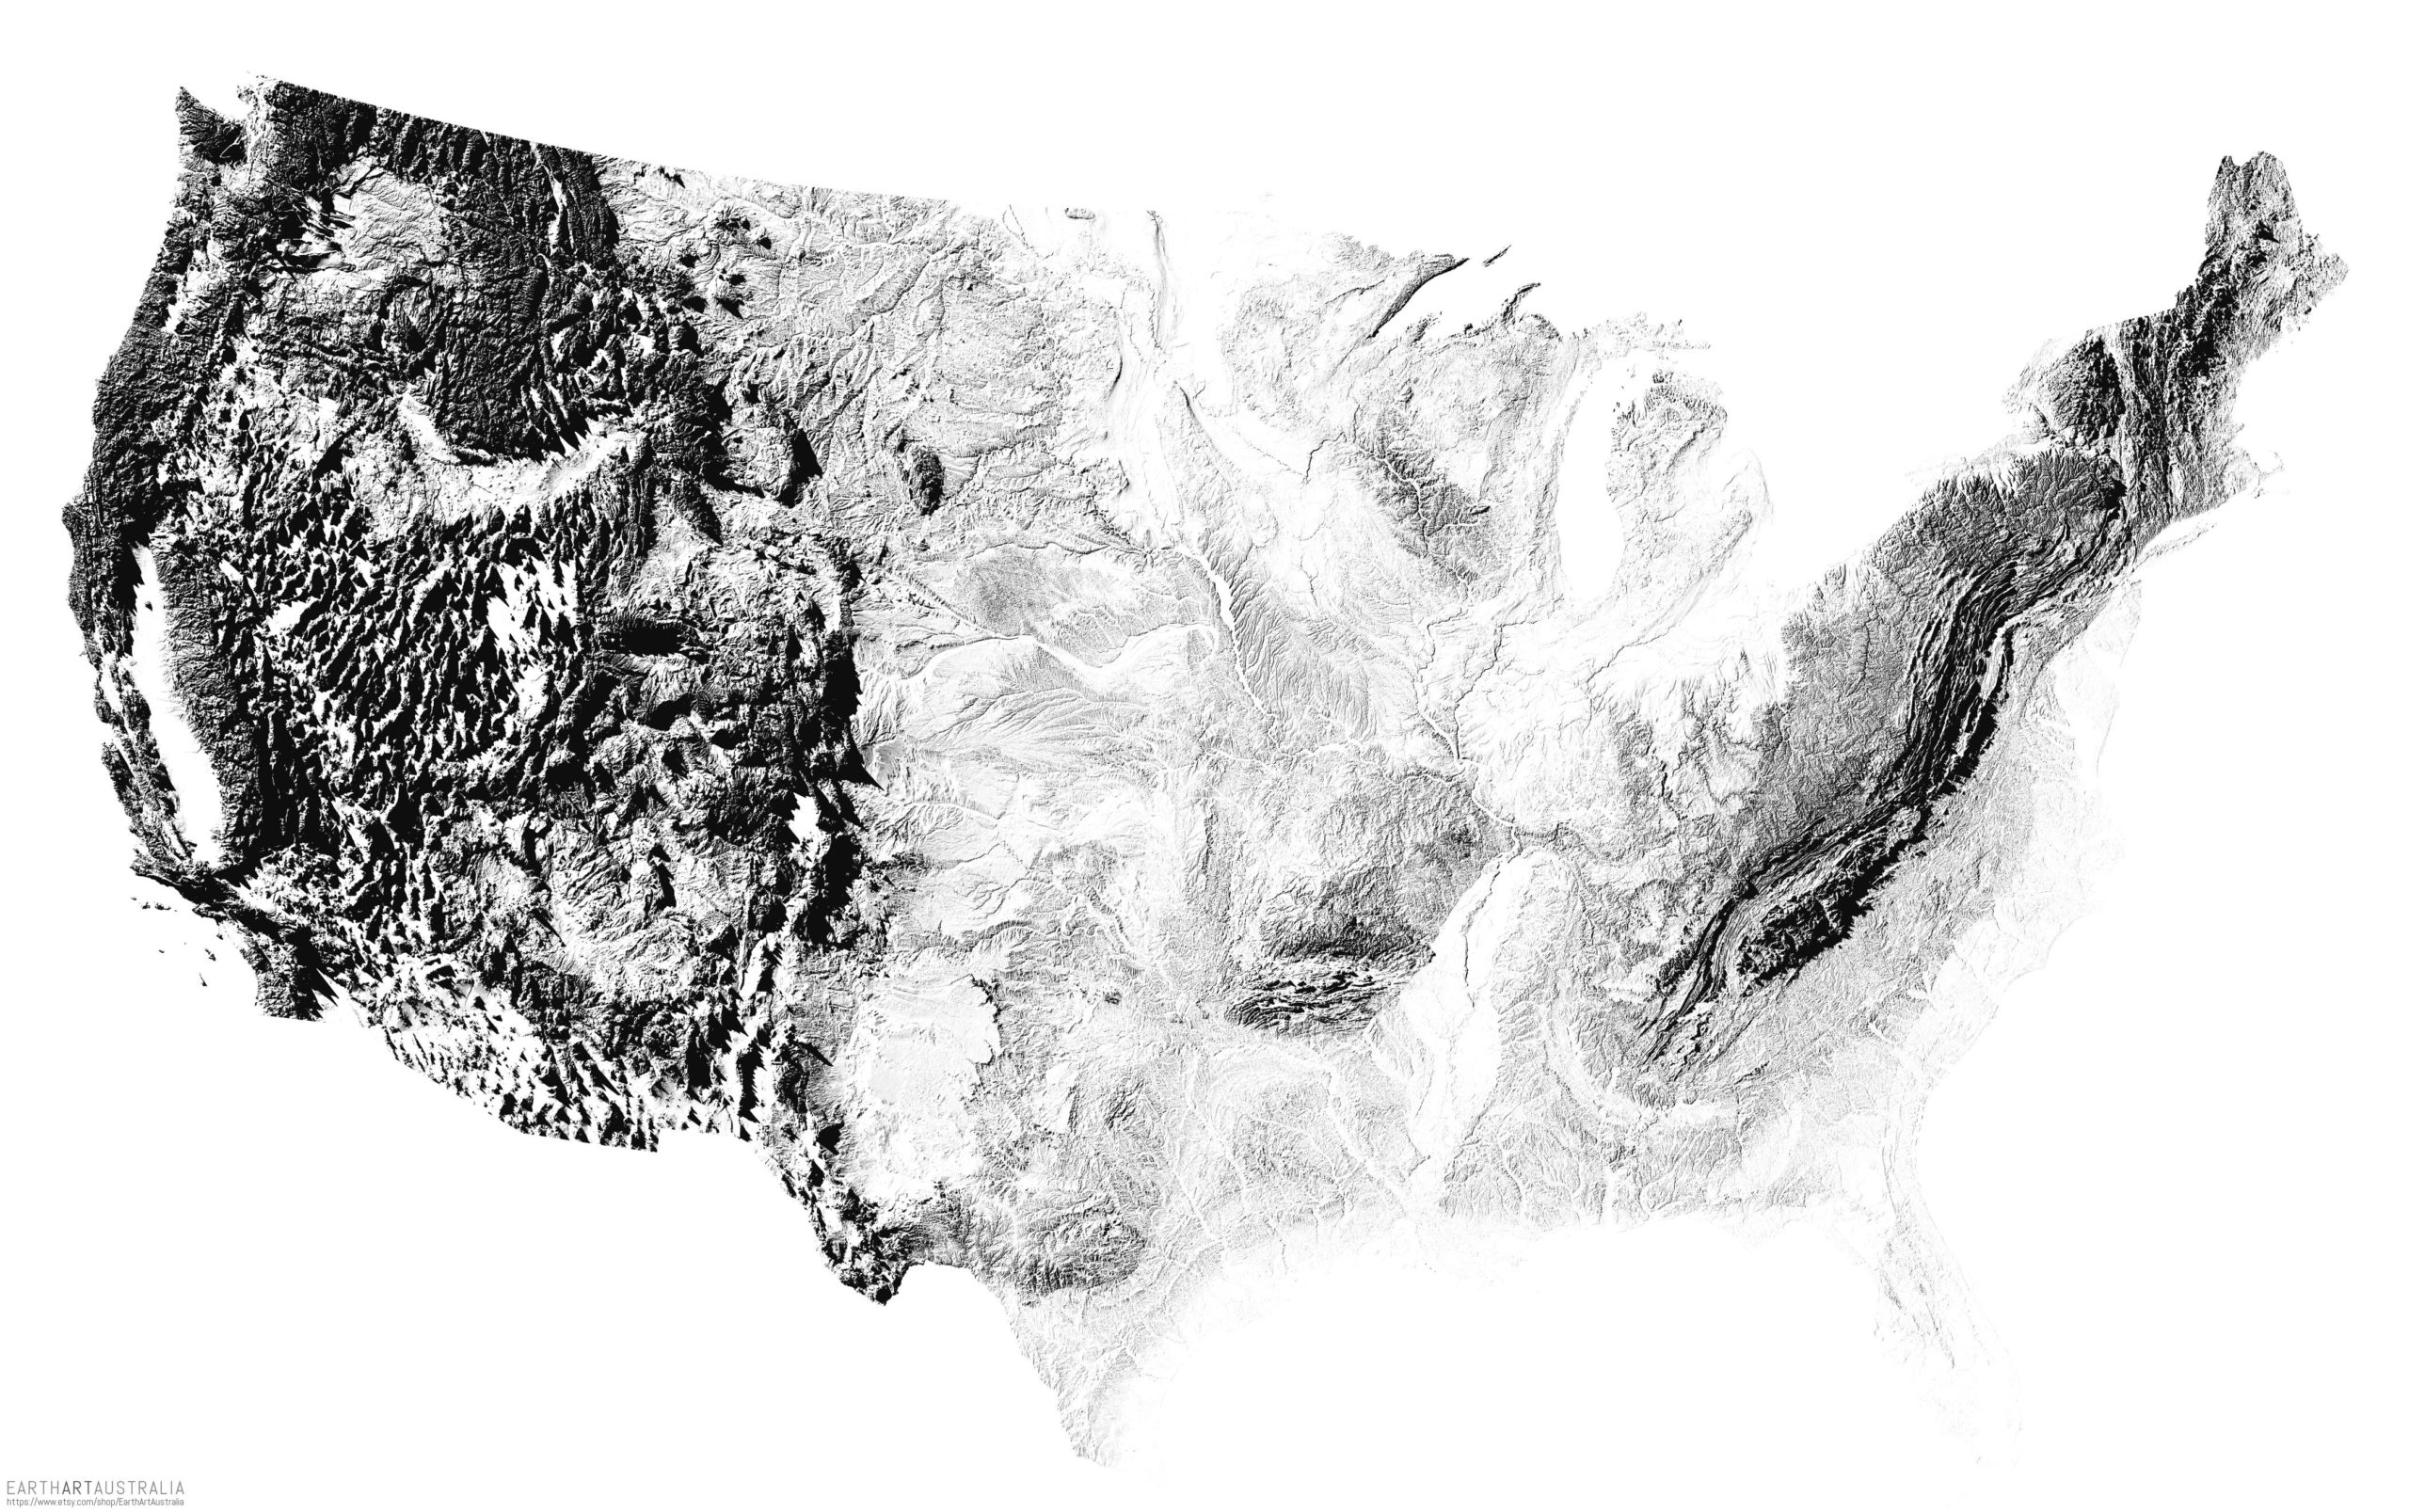 Striking New Maps Show The Beauty Of Earth’s Shadows